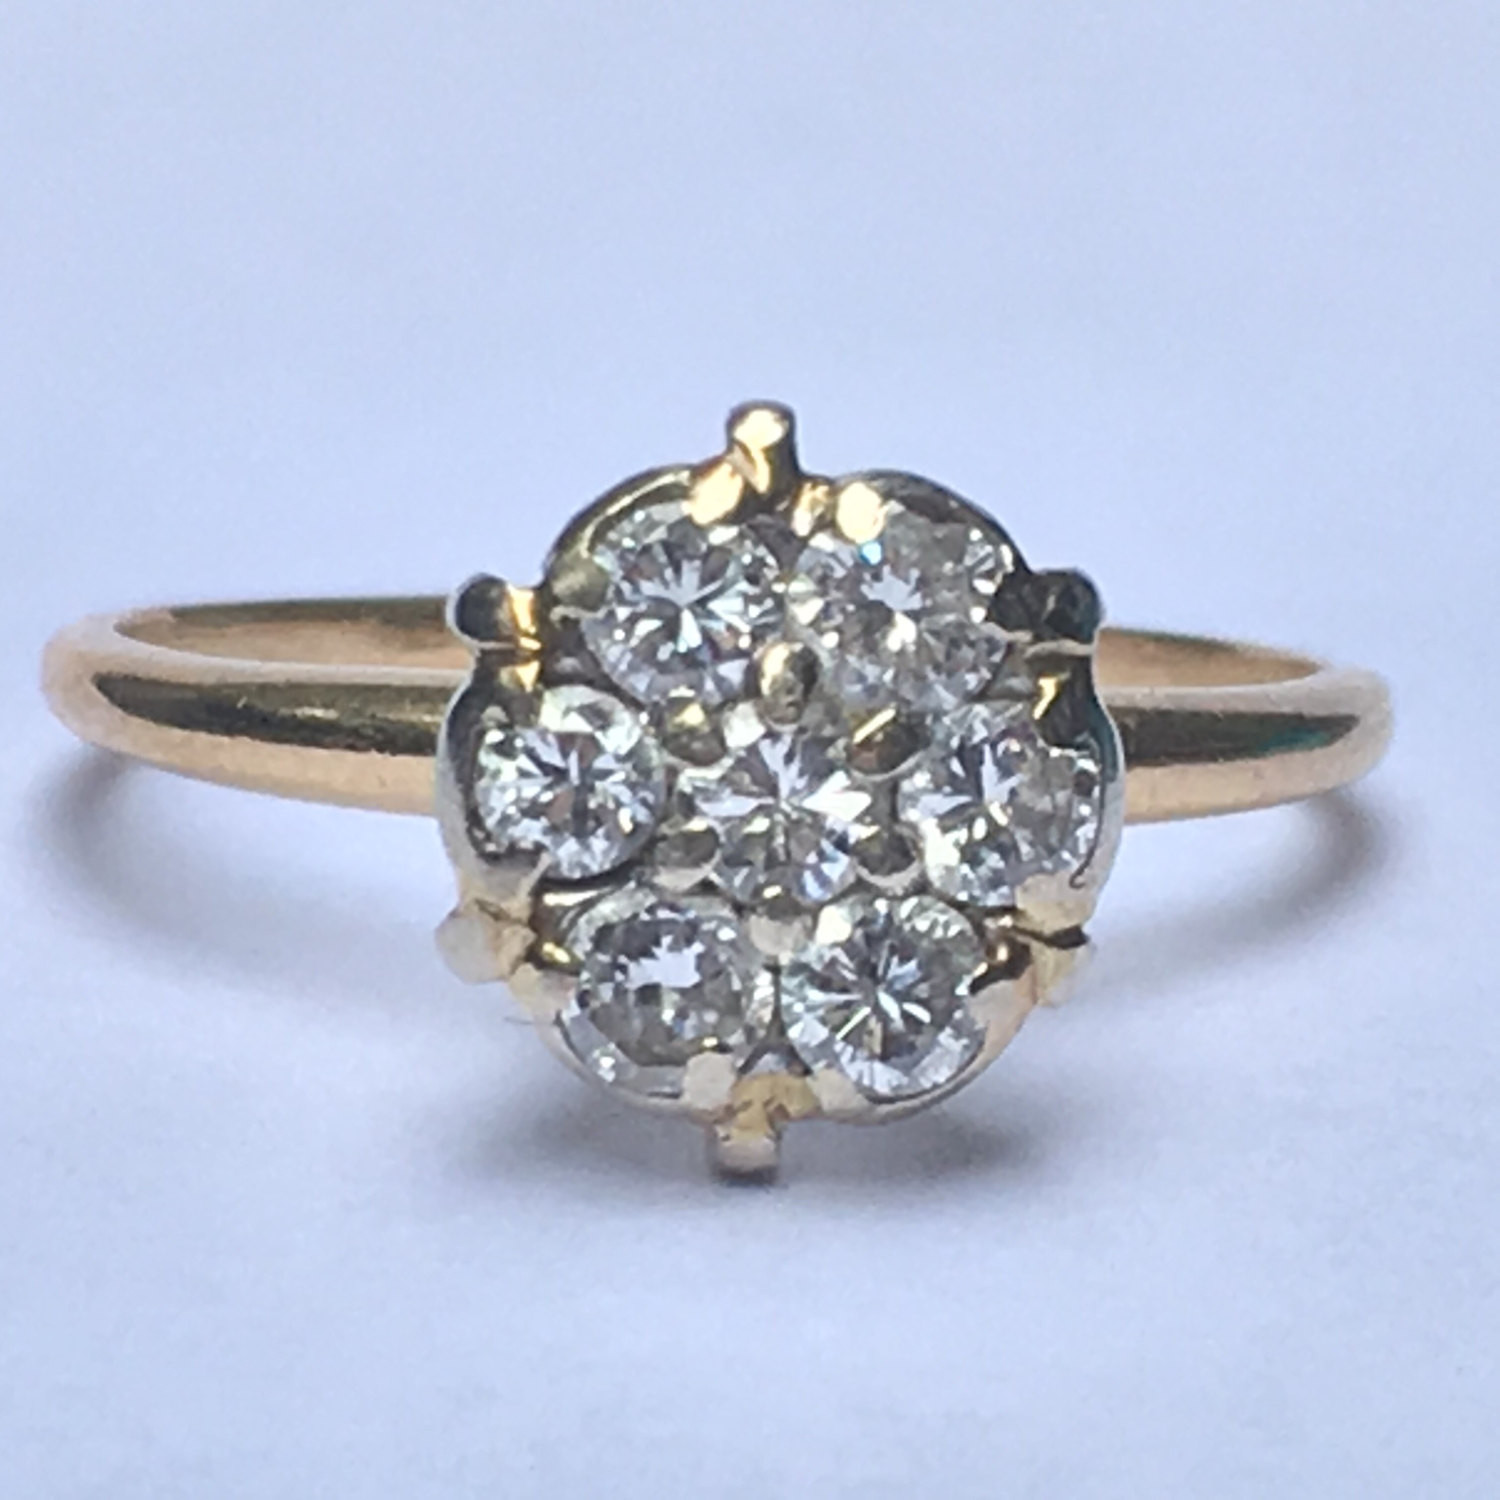 Diamond Cluster Rings
 Vintage Diamond Cluster Ring 14K Yellow Gold Floral Design